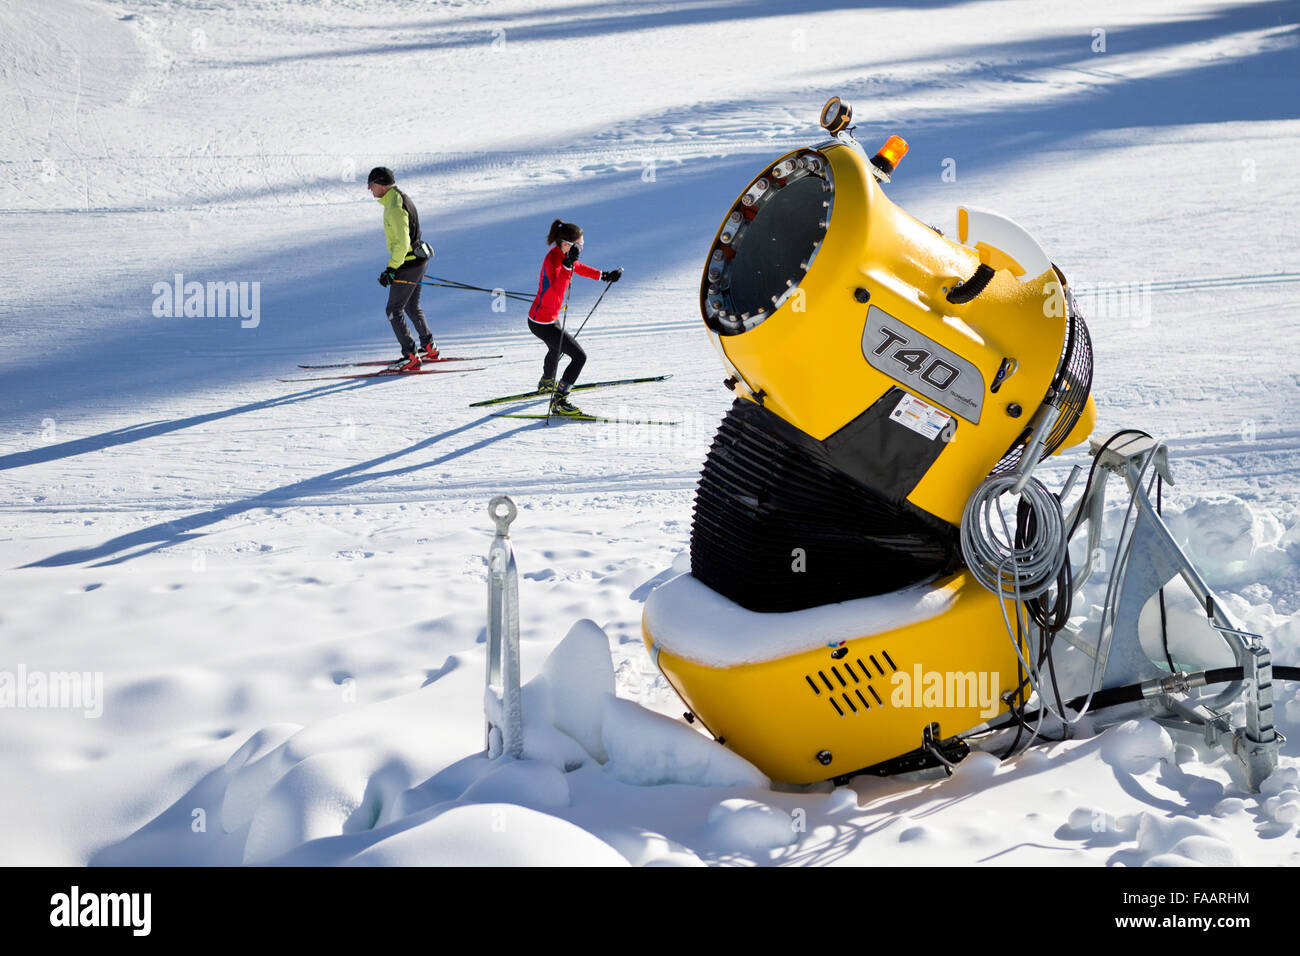 Ulrichen, Switzerland. 25th December, 2015. A snow cannon to produce artificial snow. In the background two crosscountry skier. There is a lack of snow in the skiing areas of Switzerland. Slopes are created with artificial snow to attract some tourists and reduce the economic loss. Credit:  Dominic Steinmann/Alamy Live News Stock Photo